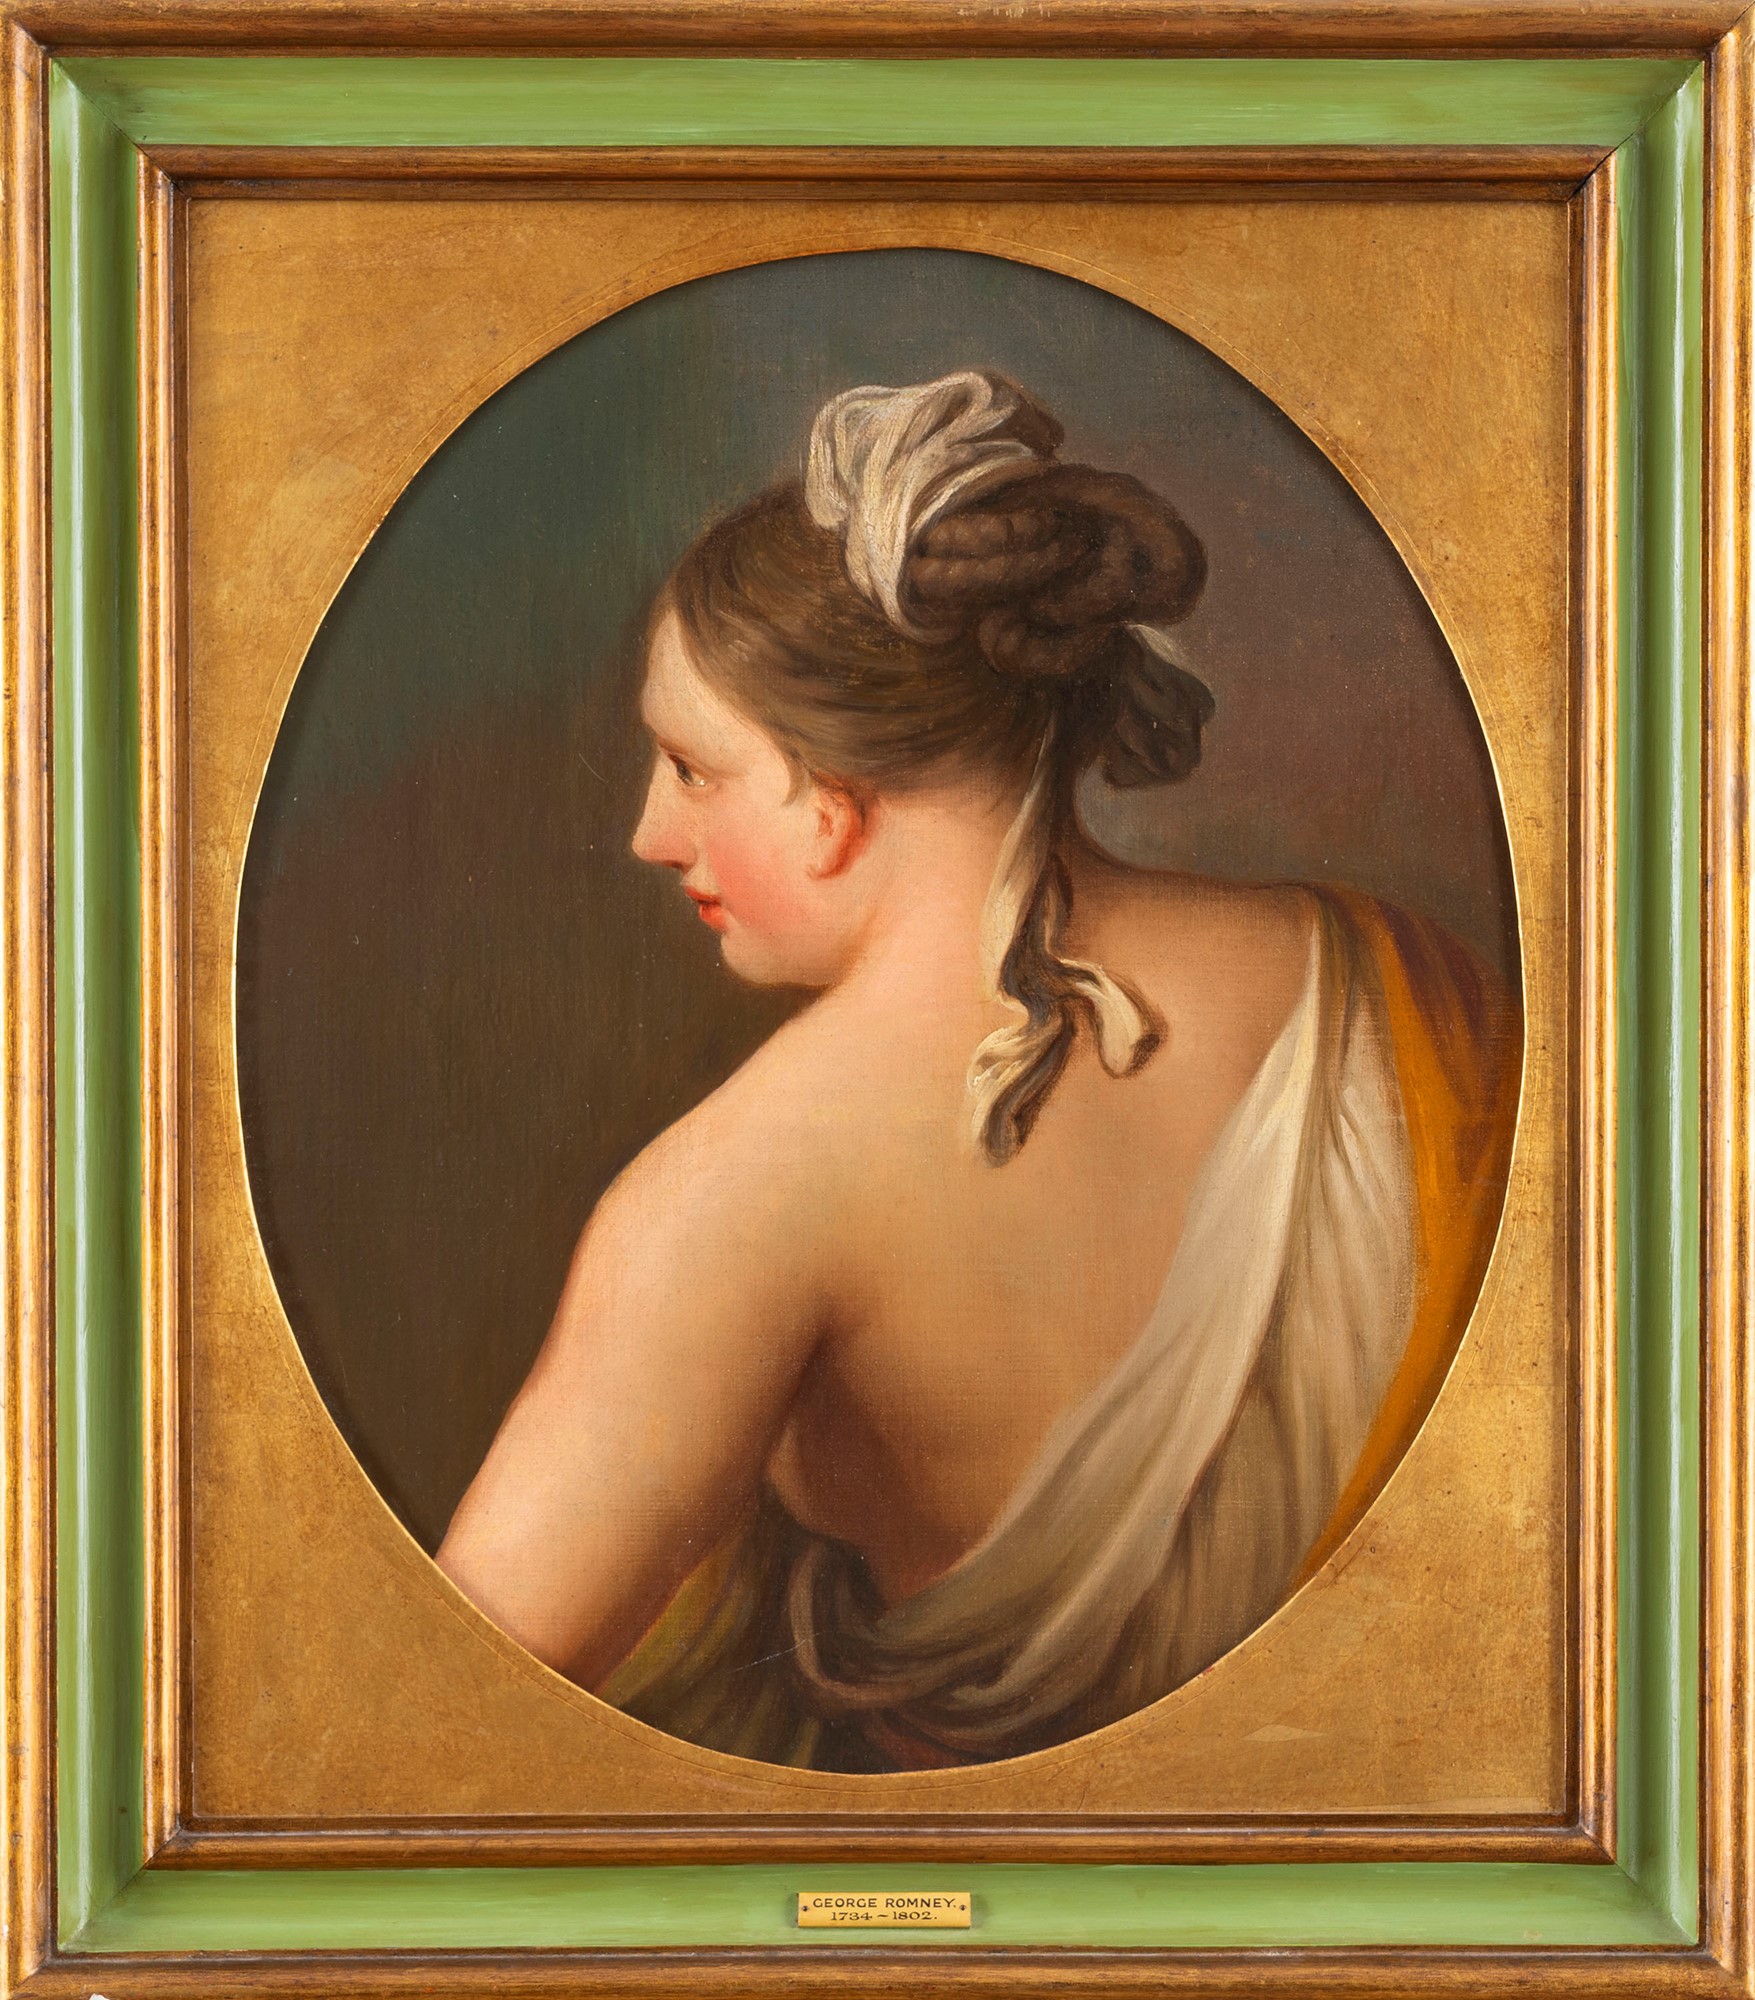 English school, late eighteenth century - early nineteenth century - Young woman from behind - Image 2 of 3